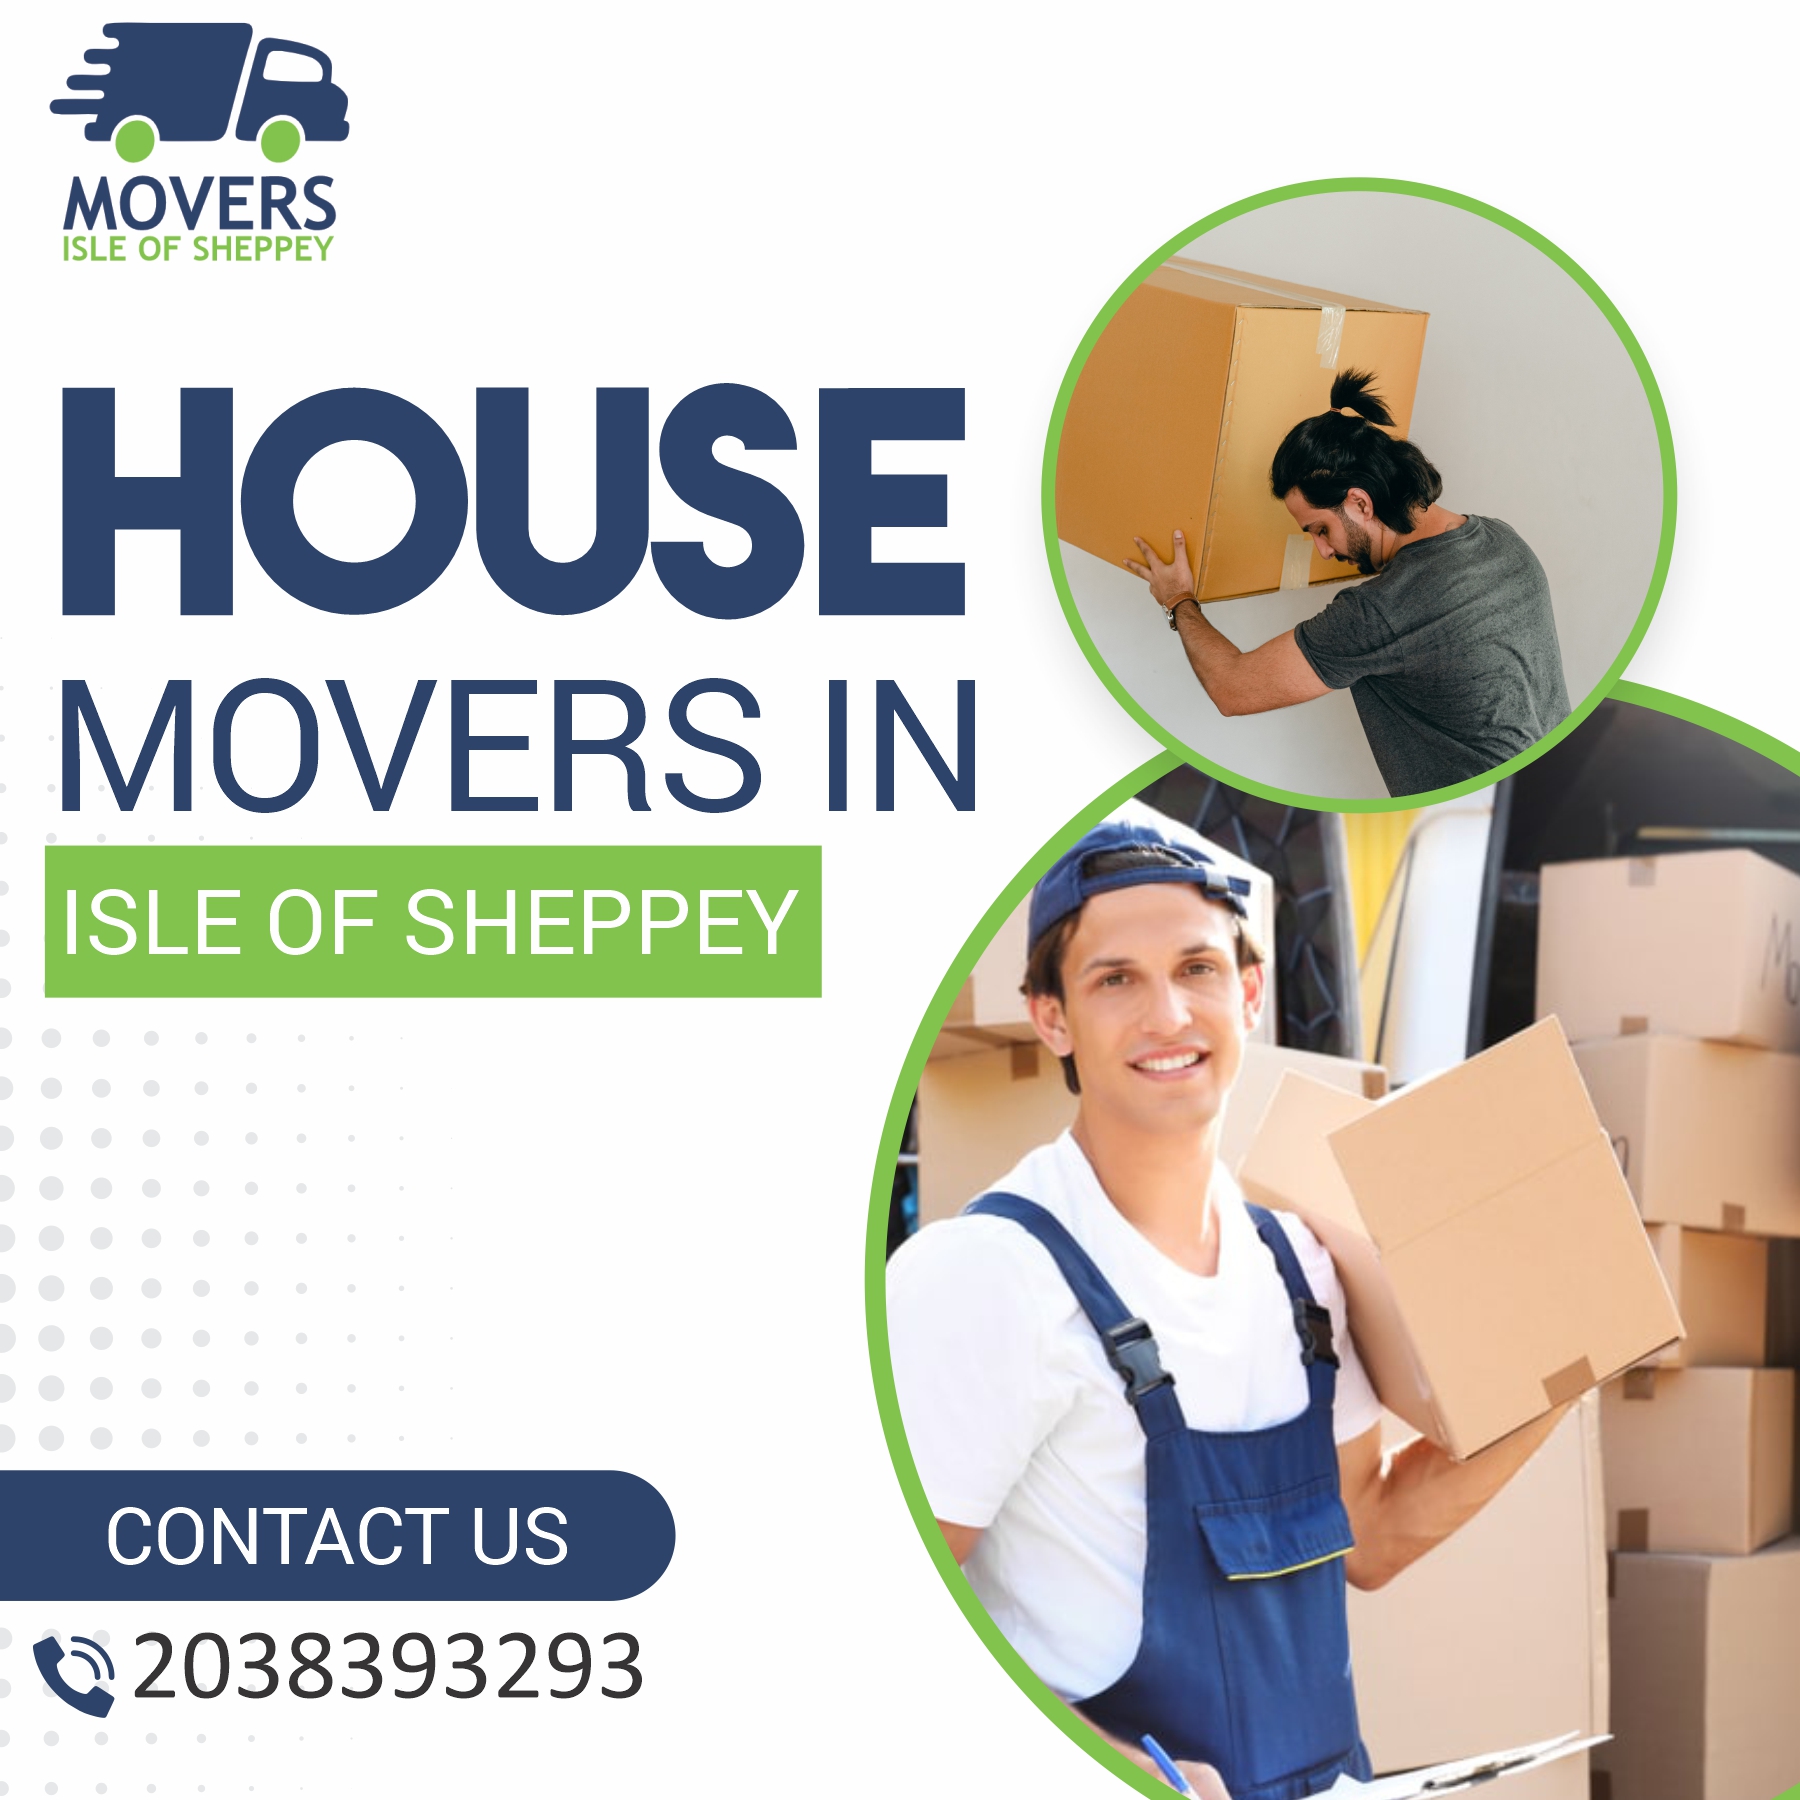 Main image for Isle of Sheppey Movers